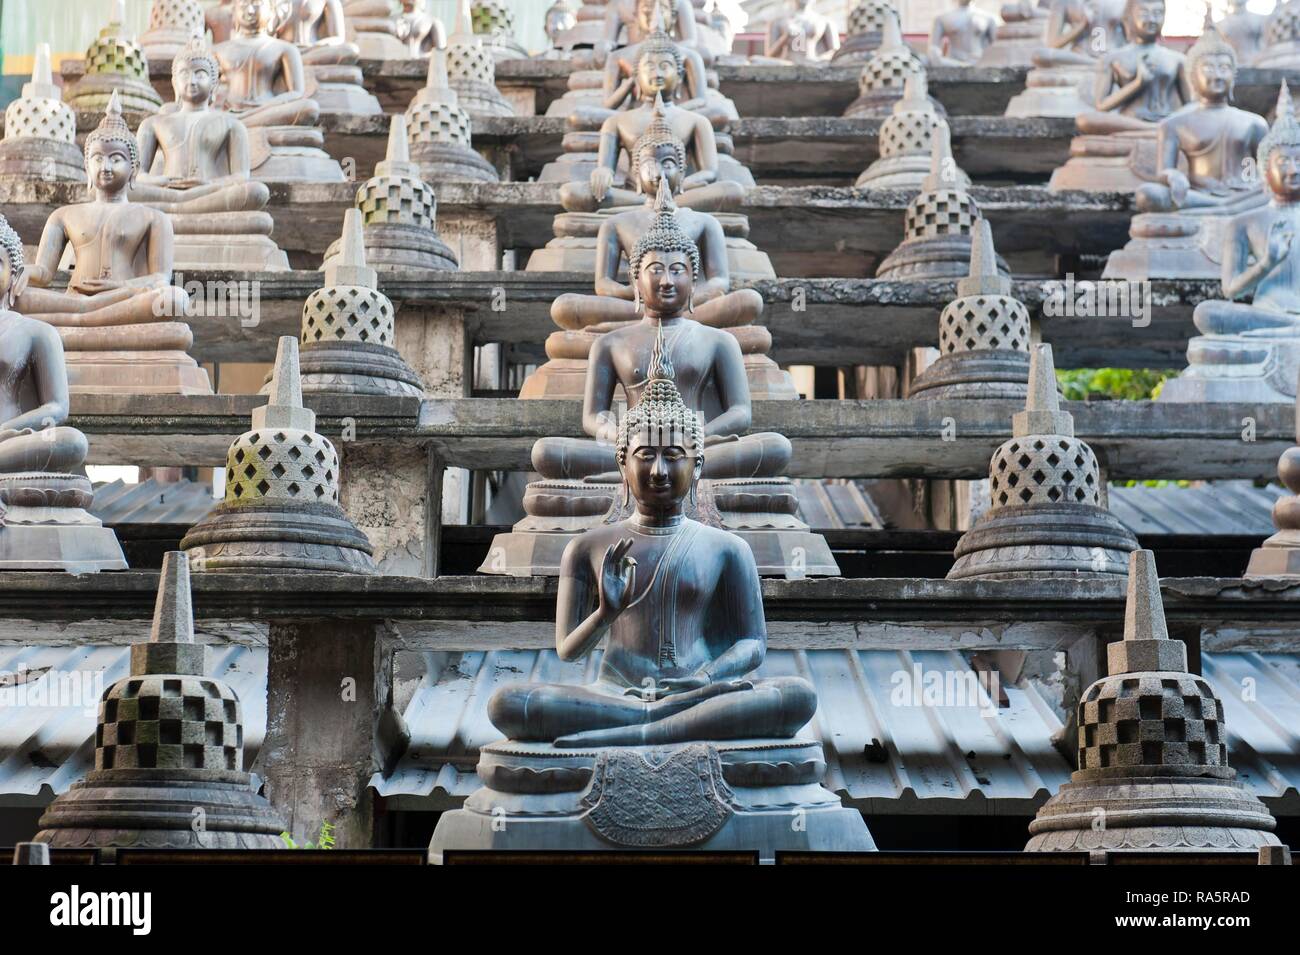 Many Buddha statues with different mudras in the temple, Gangaramaya Temple, Colombo, Sri Lanka Stock Photo